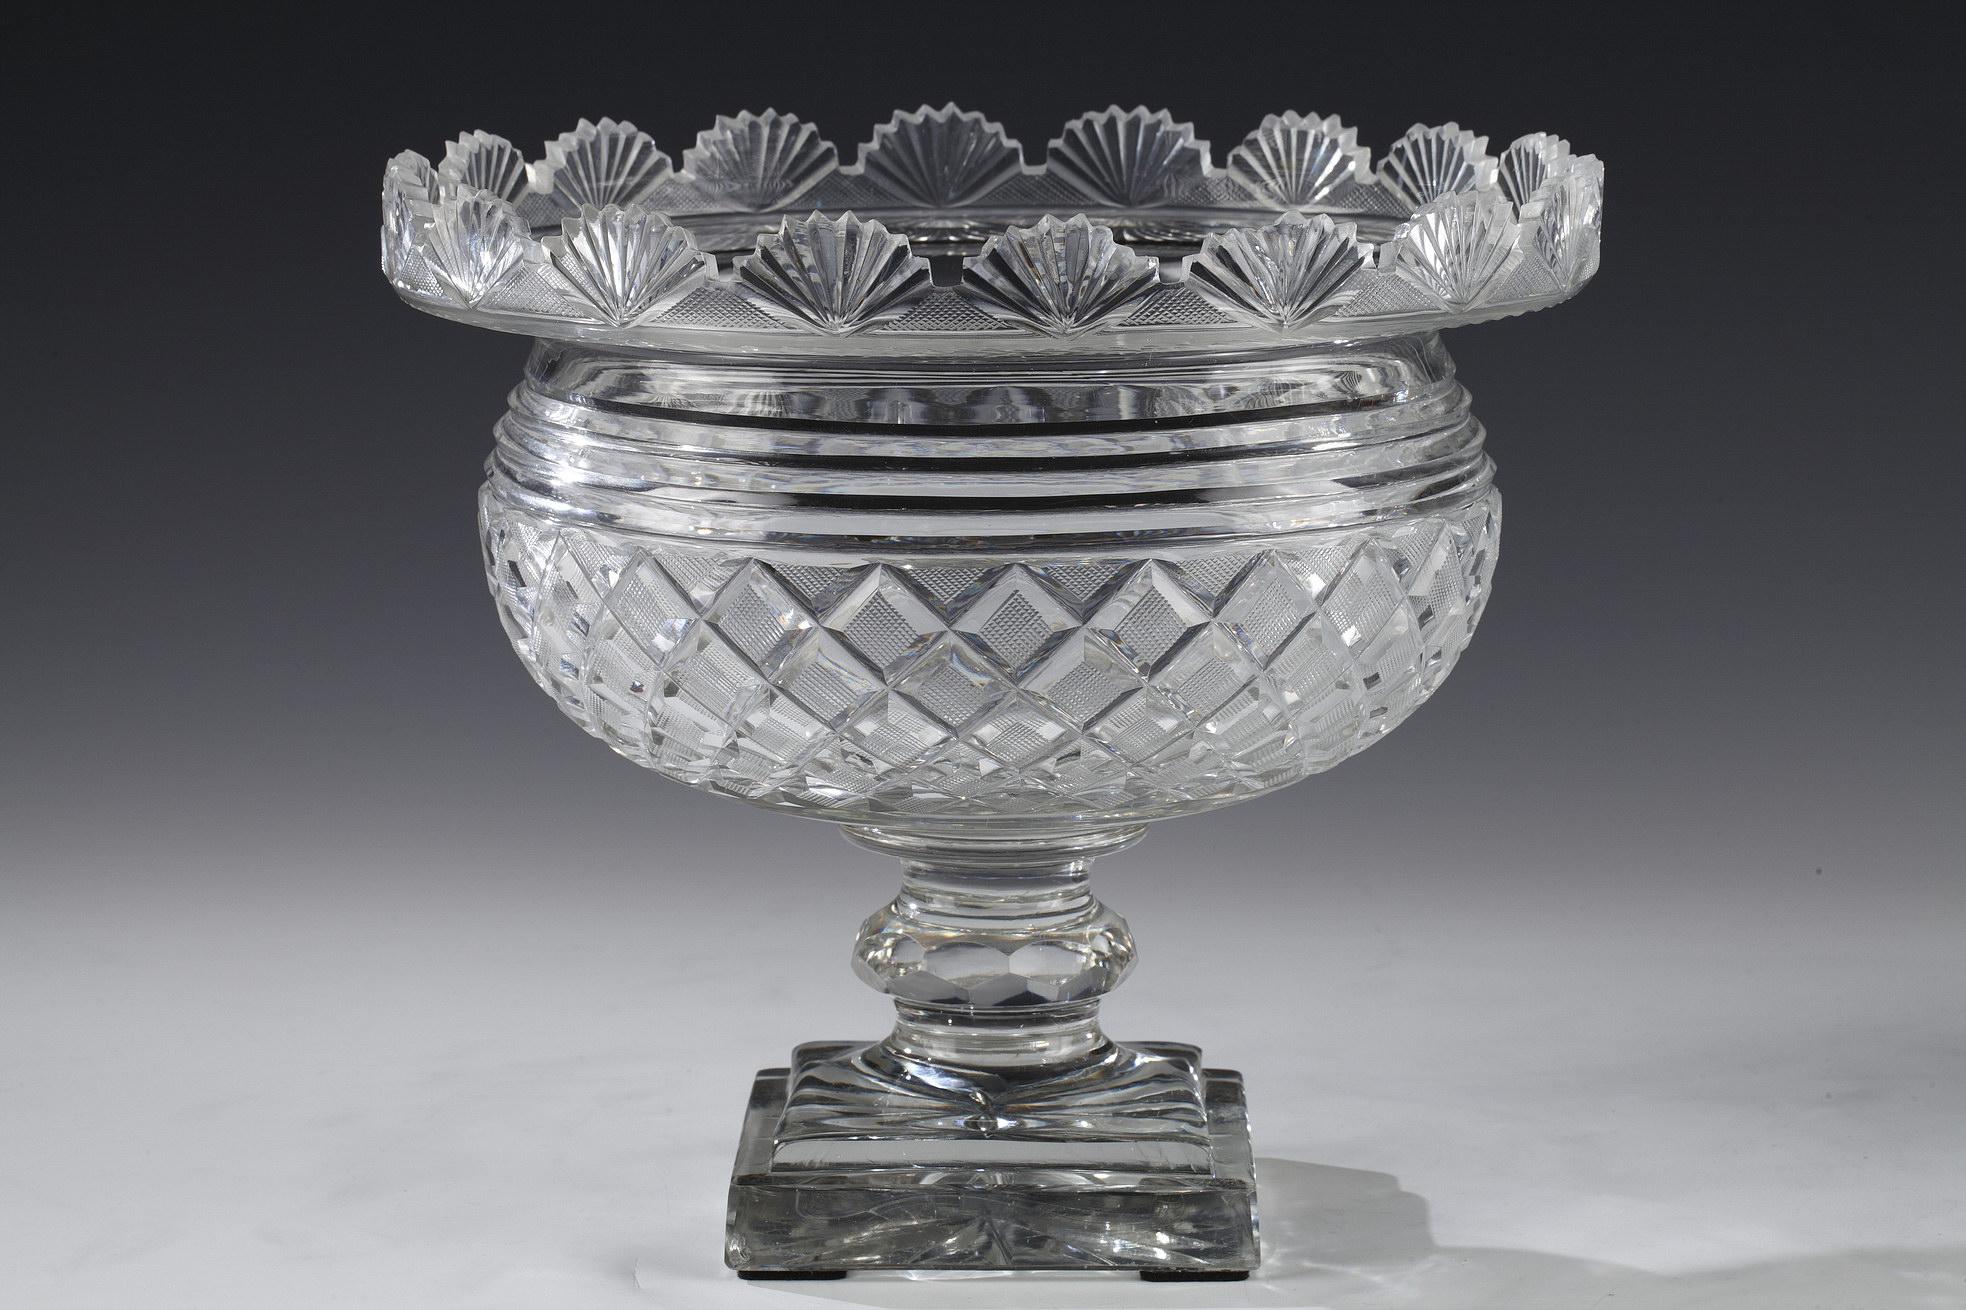 French Set of Cut Crystal Vases Attributed to Baccarat, France, Circa 1880